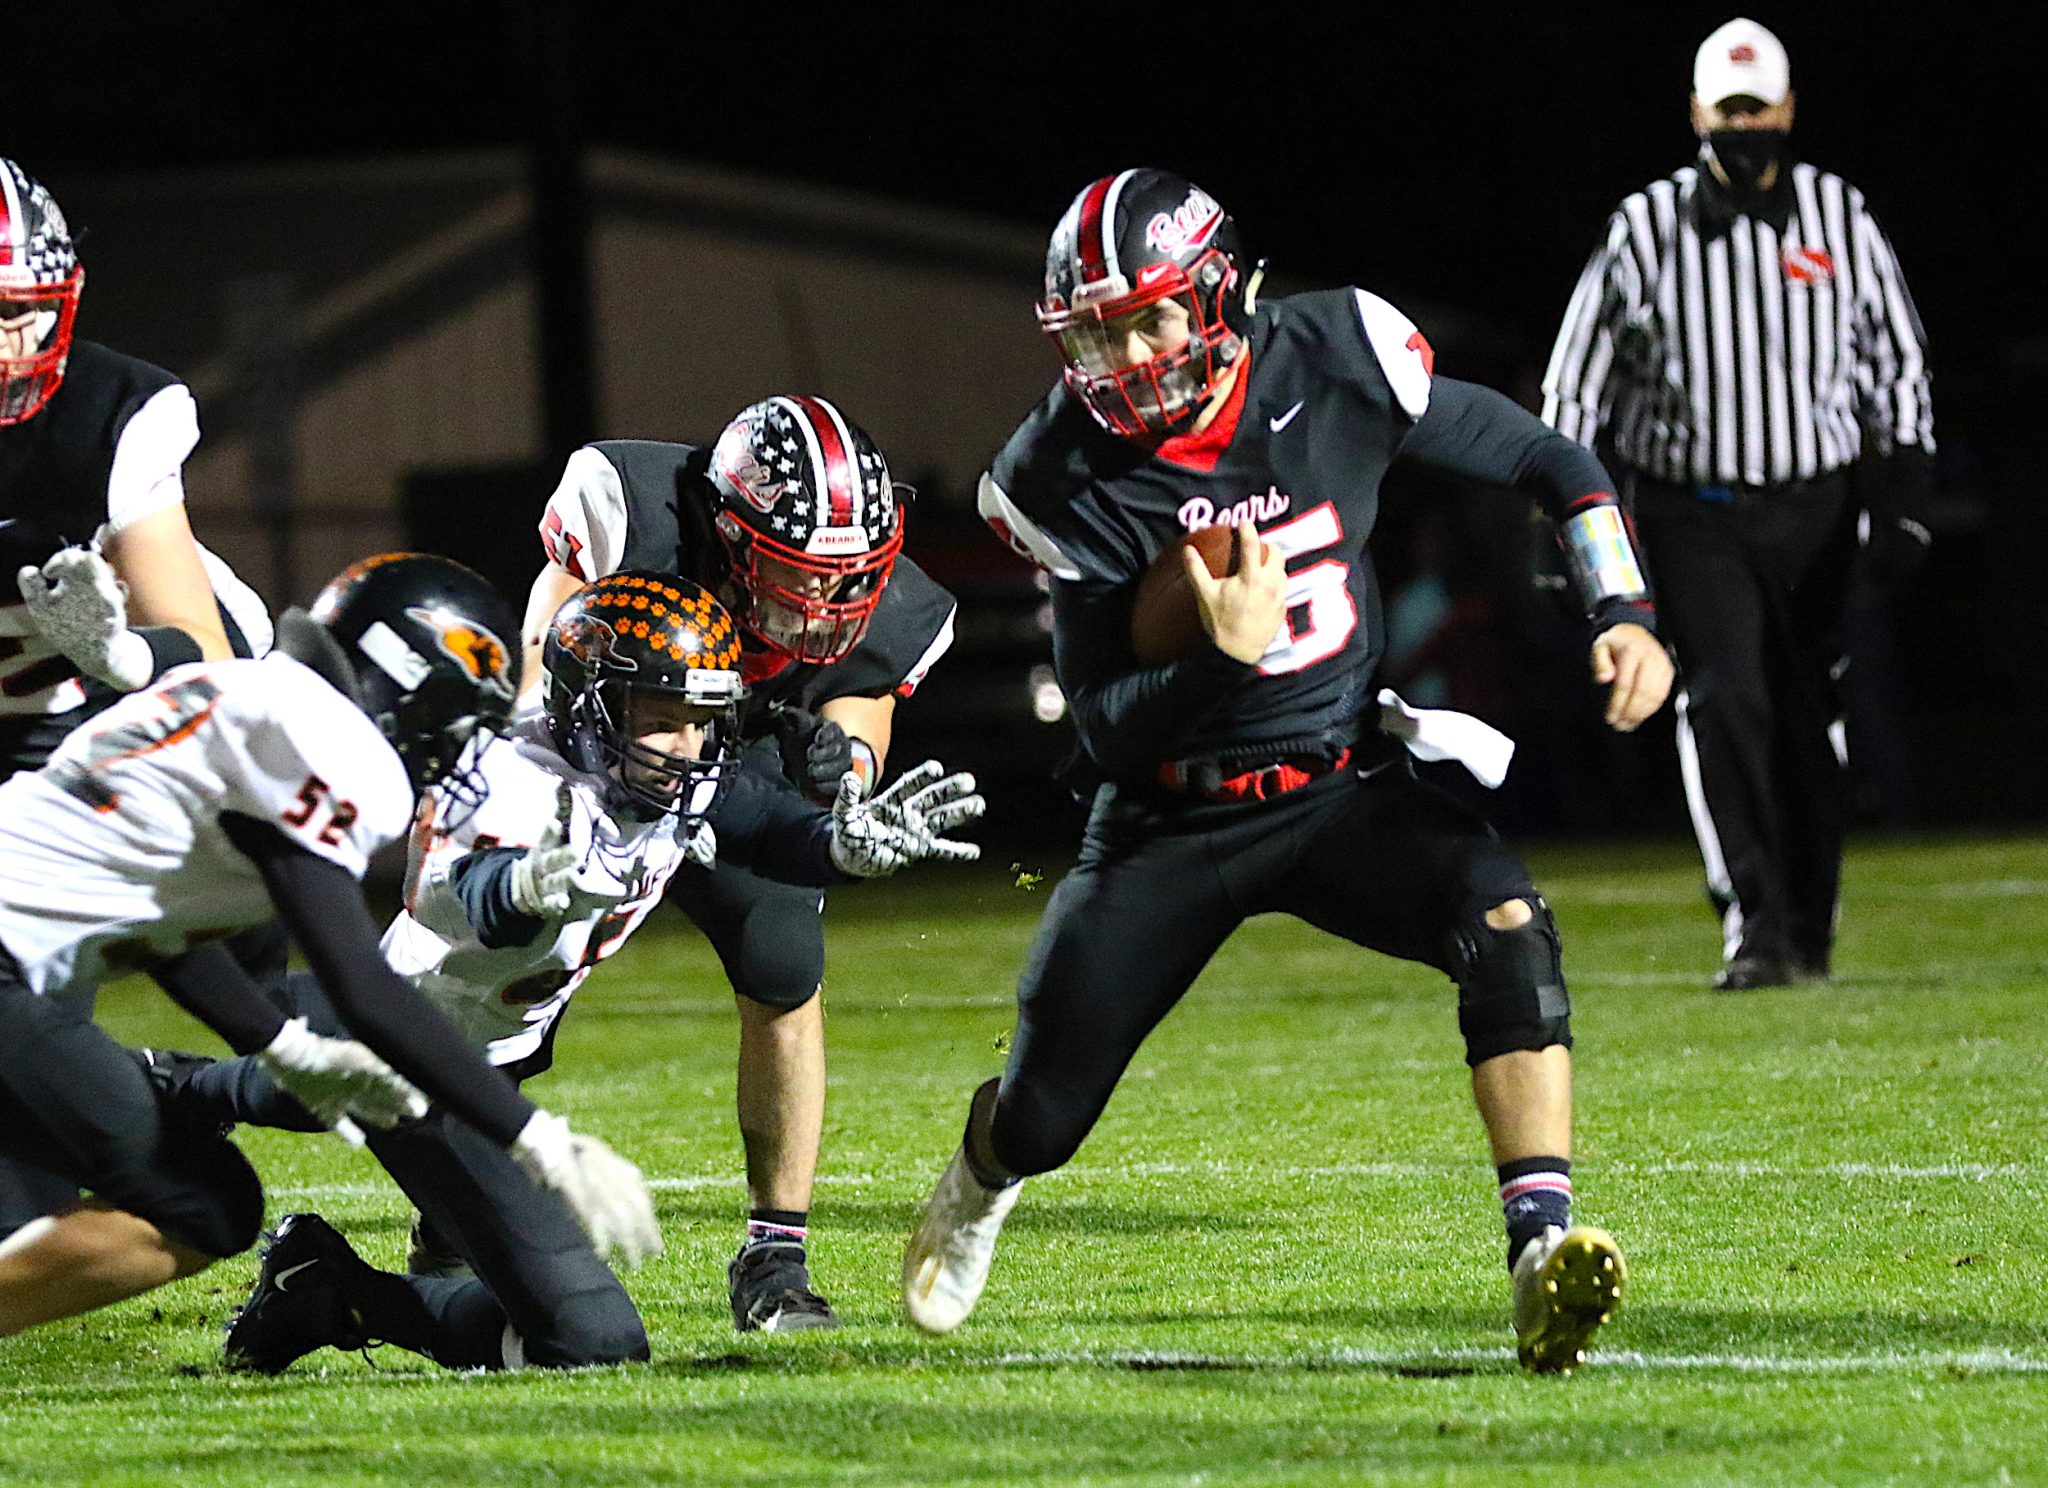 Late Comeback by West Branch Comes up Just Short in Secondround Loss